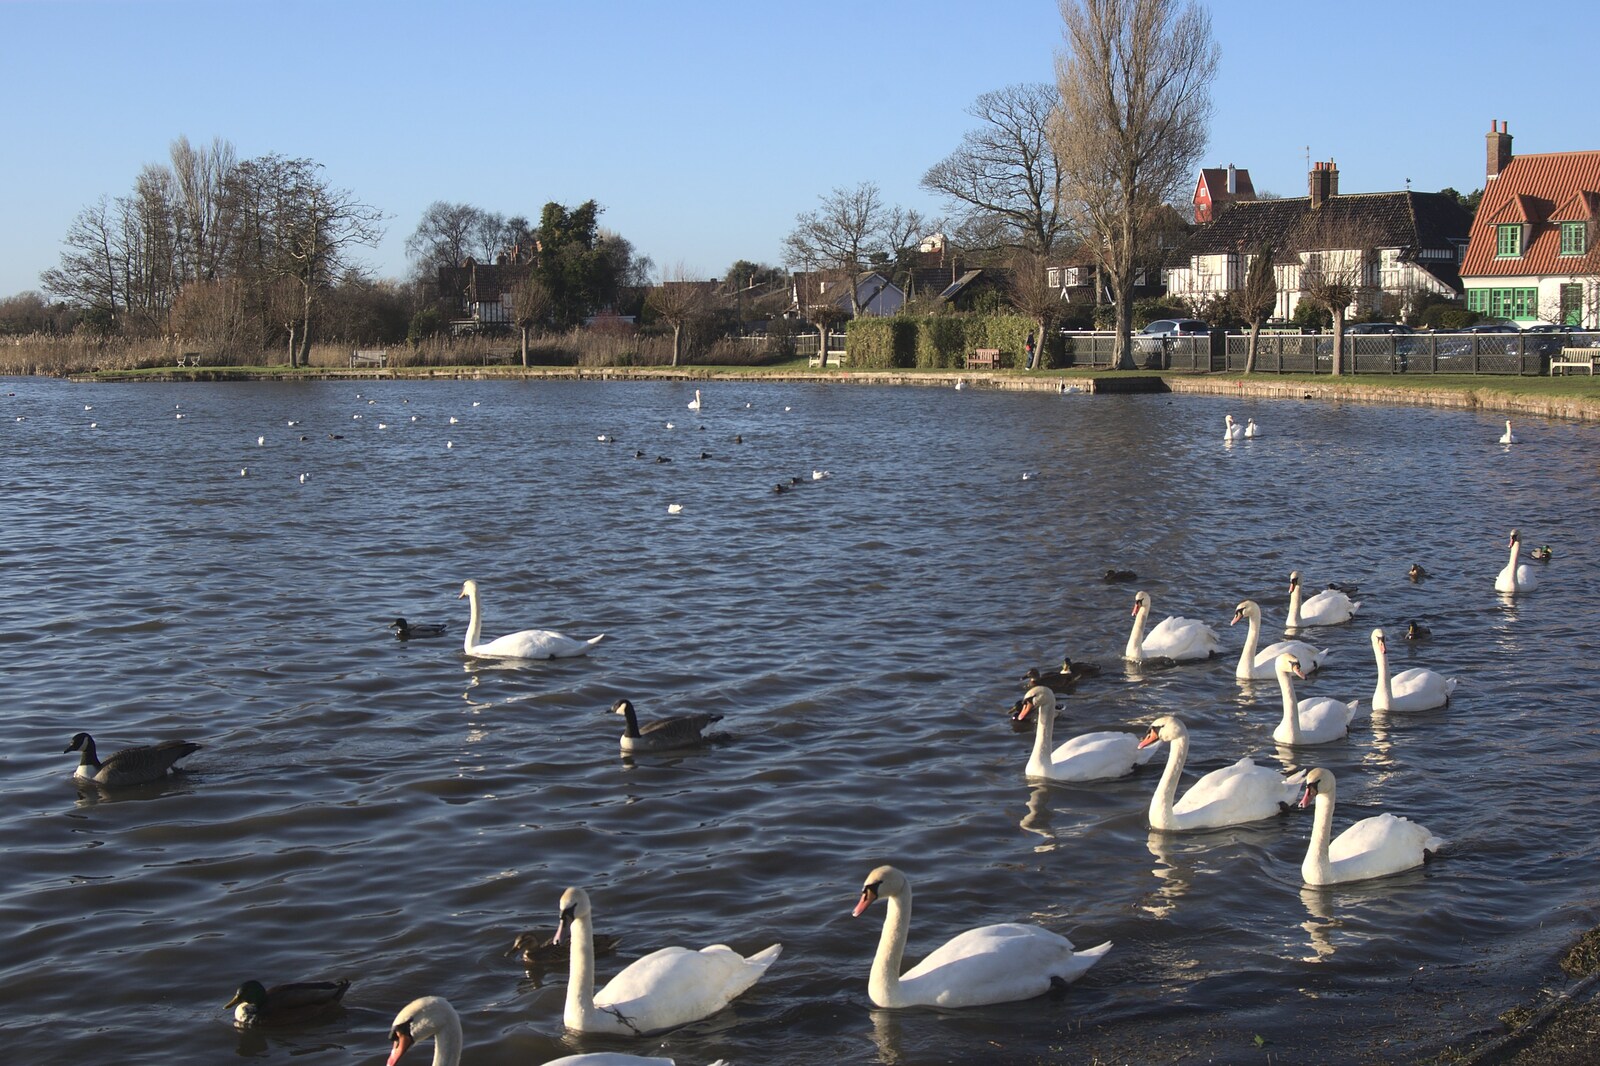 A Trip to Thorpeness, Suffolk - 9th January 2011: A bunch of swans